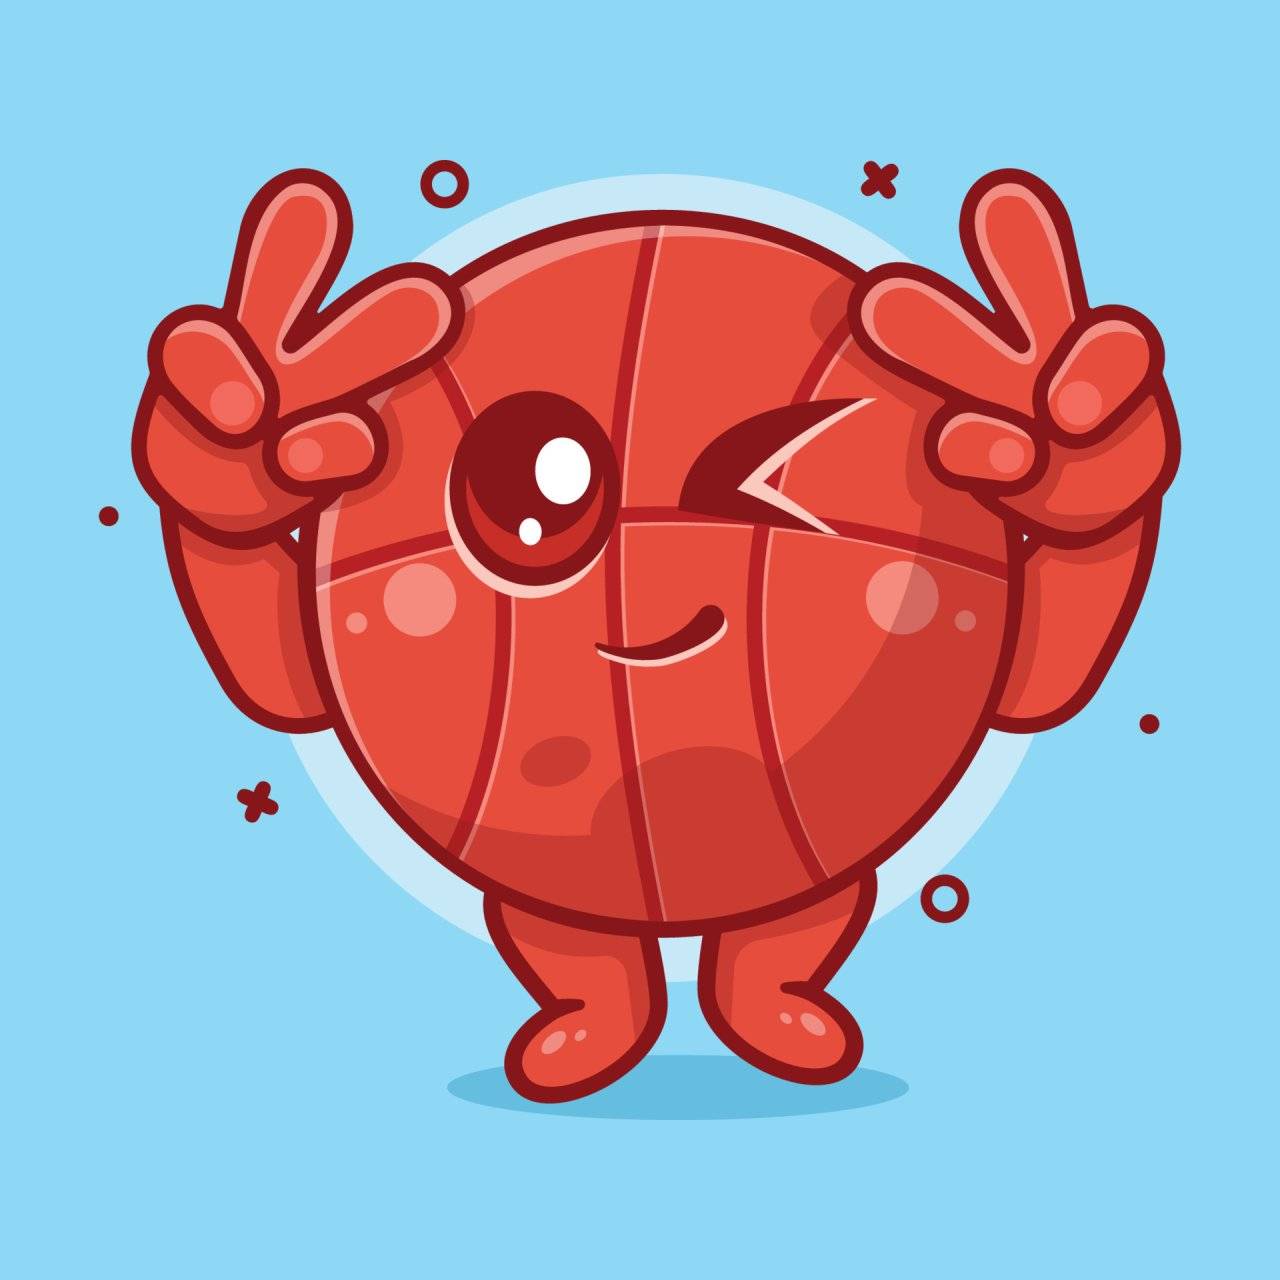 cute-basketball-ball-character-with-peace-sign-hand-gesture-isolated-cartoon-in-flat-style-des...jpg